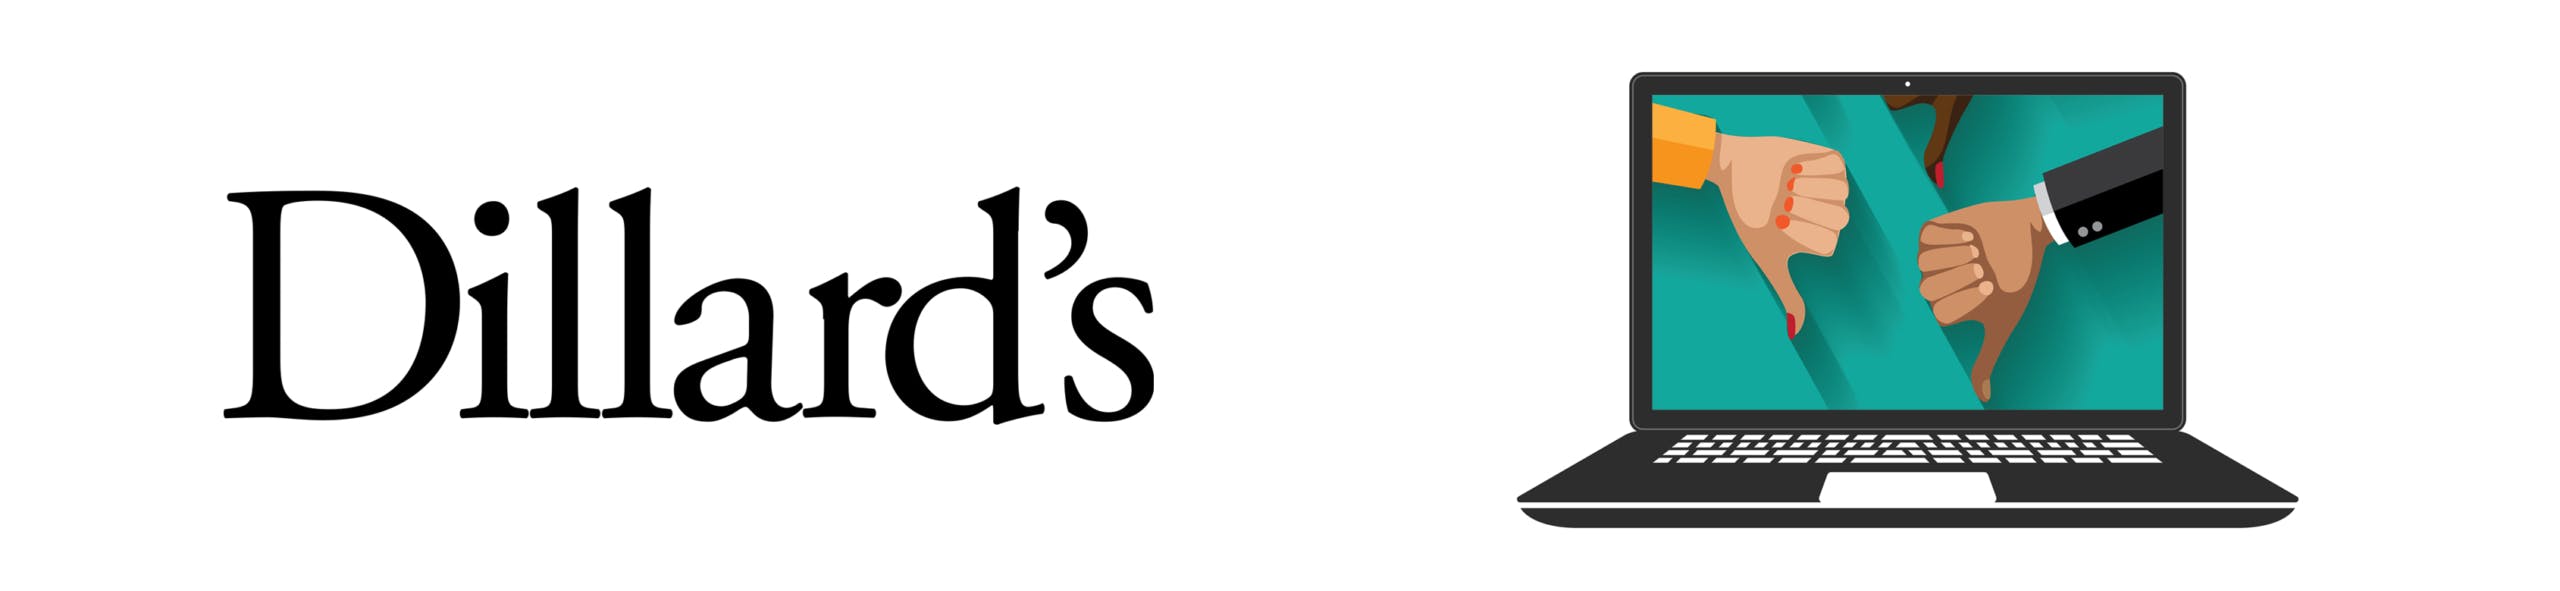 Dillard's logo next to a laptop with thumbs pointing down